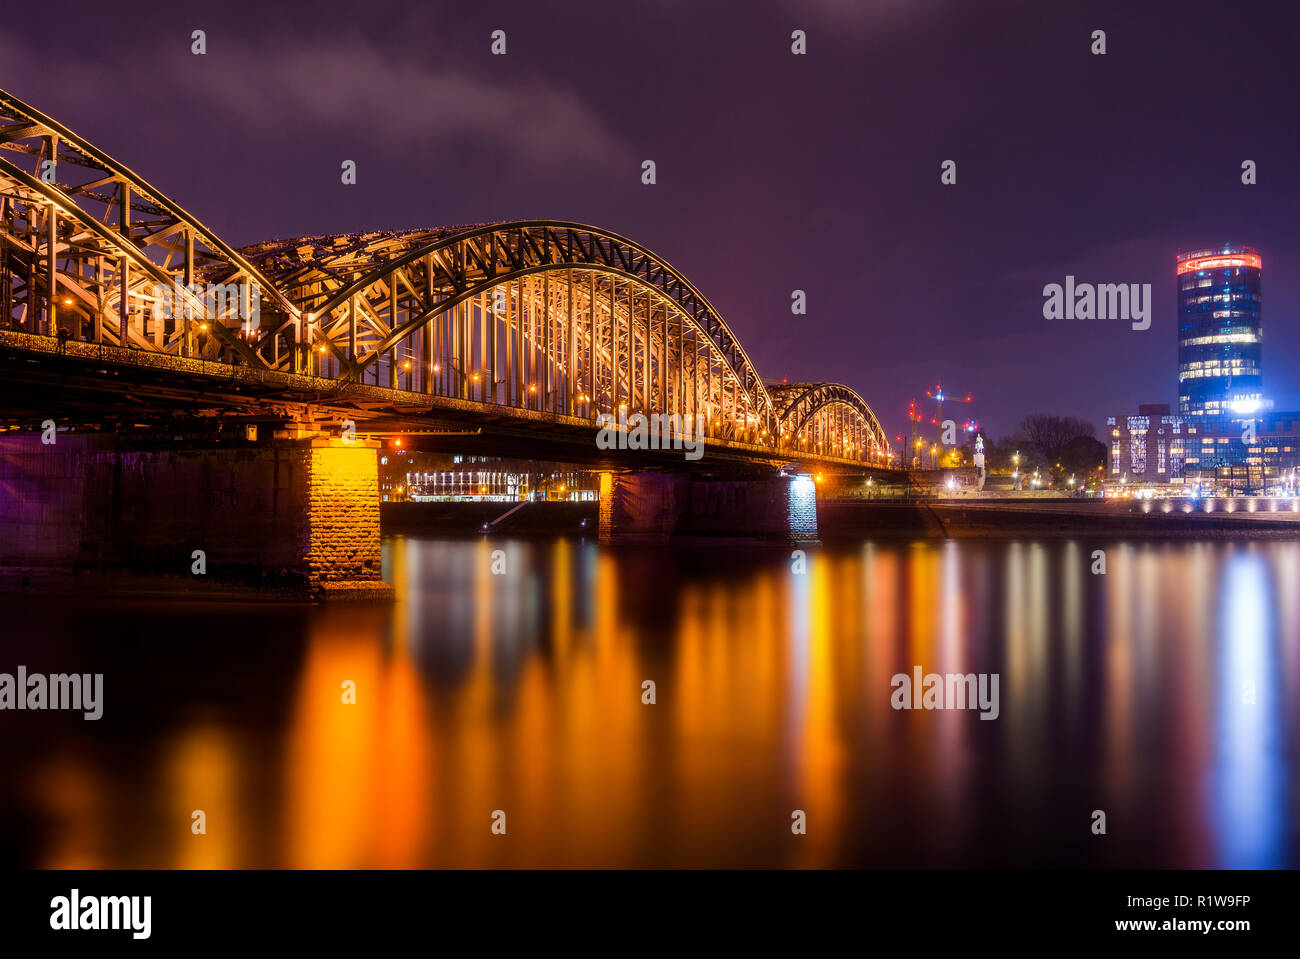 View of the Hohenzollern Bridge, the Skyscraper Cologne Triangle, the Hyatt Regency and the Long River Rhine at Night in Germany Cologne 2018. Stock Photo